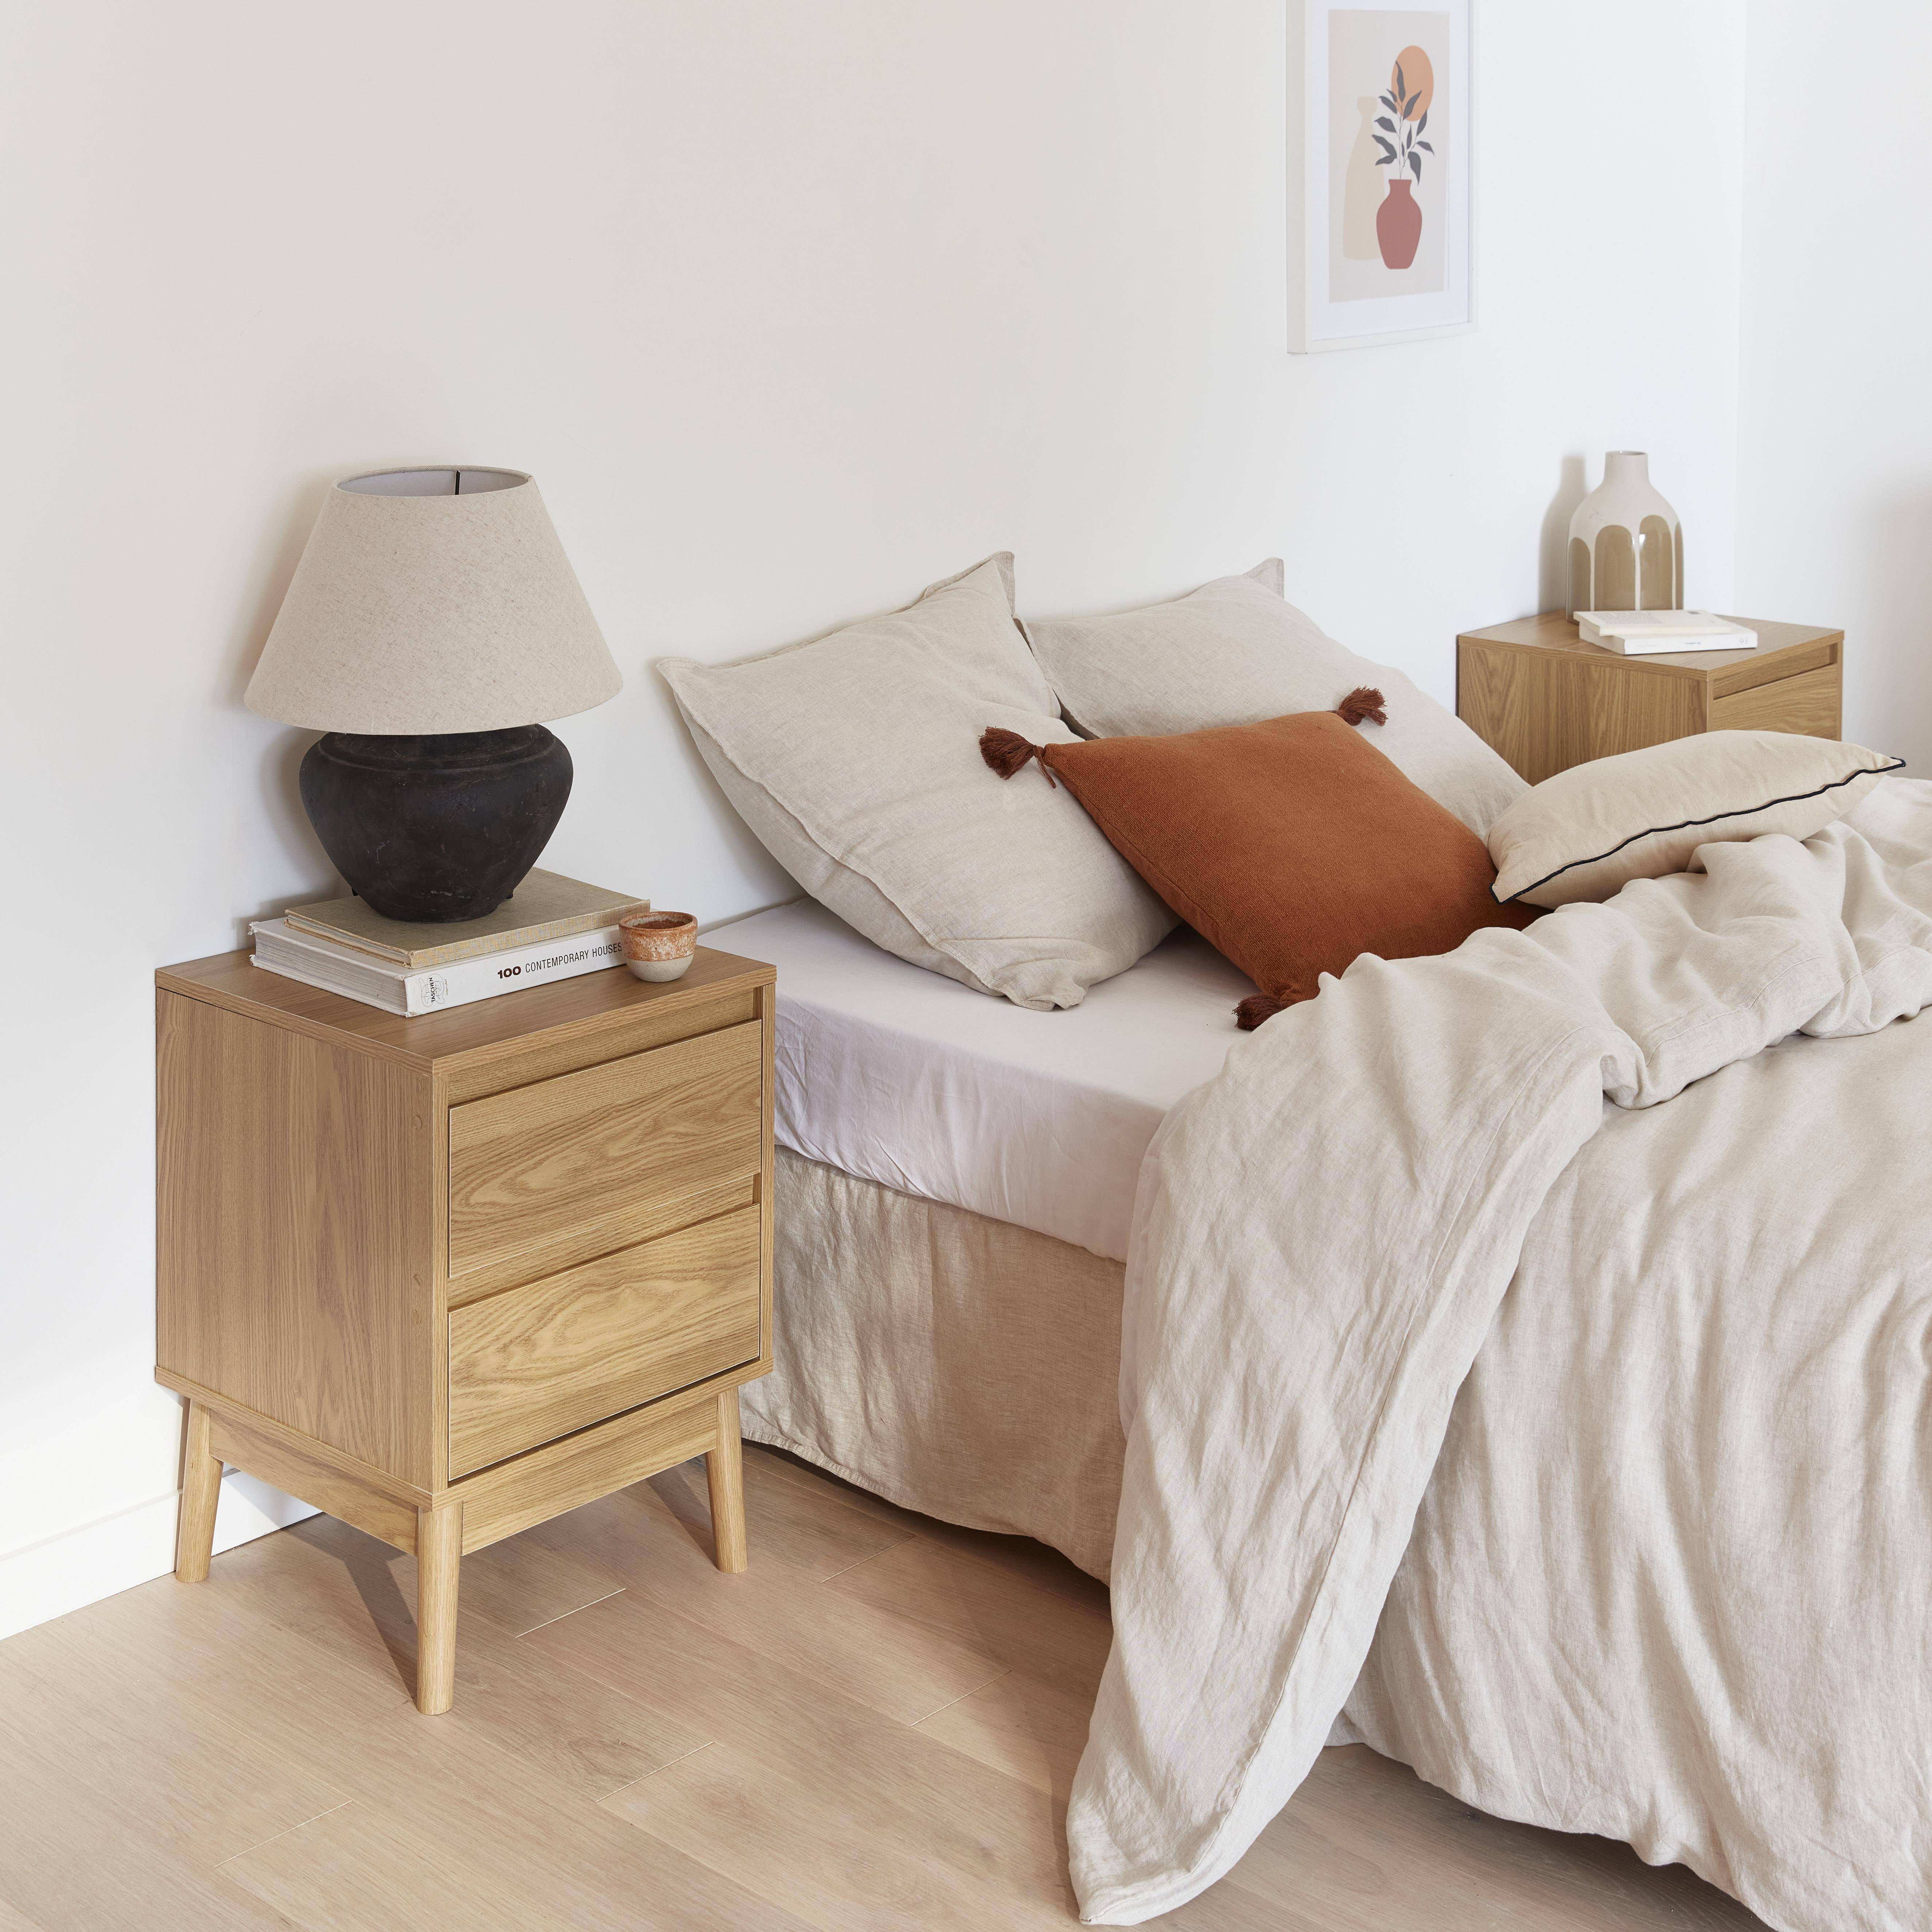 Pair of bedside tables with 2 drawers, 26x40x56cm - Dune - Natural Photo2